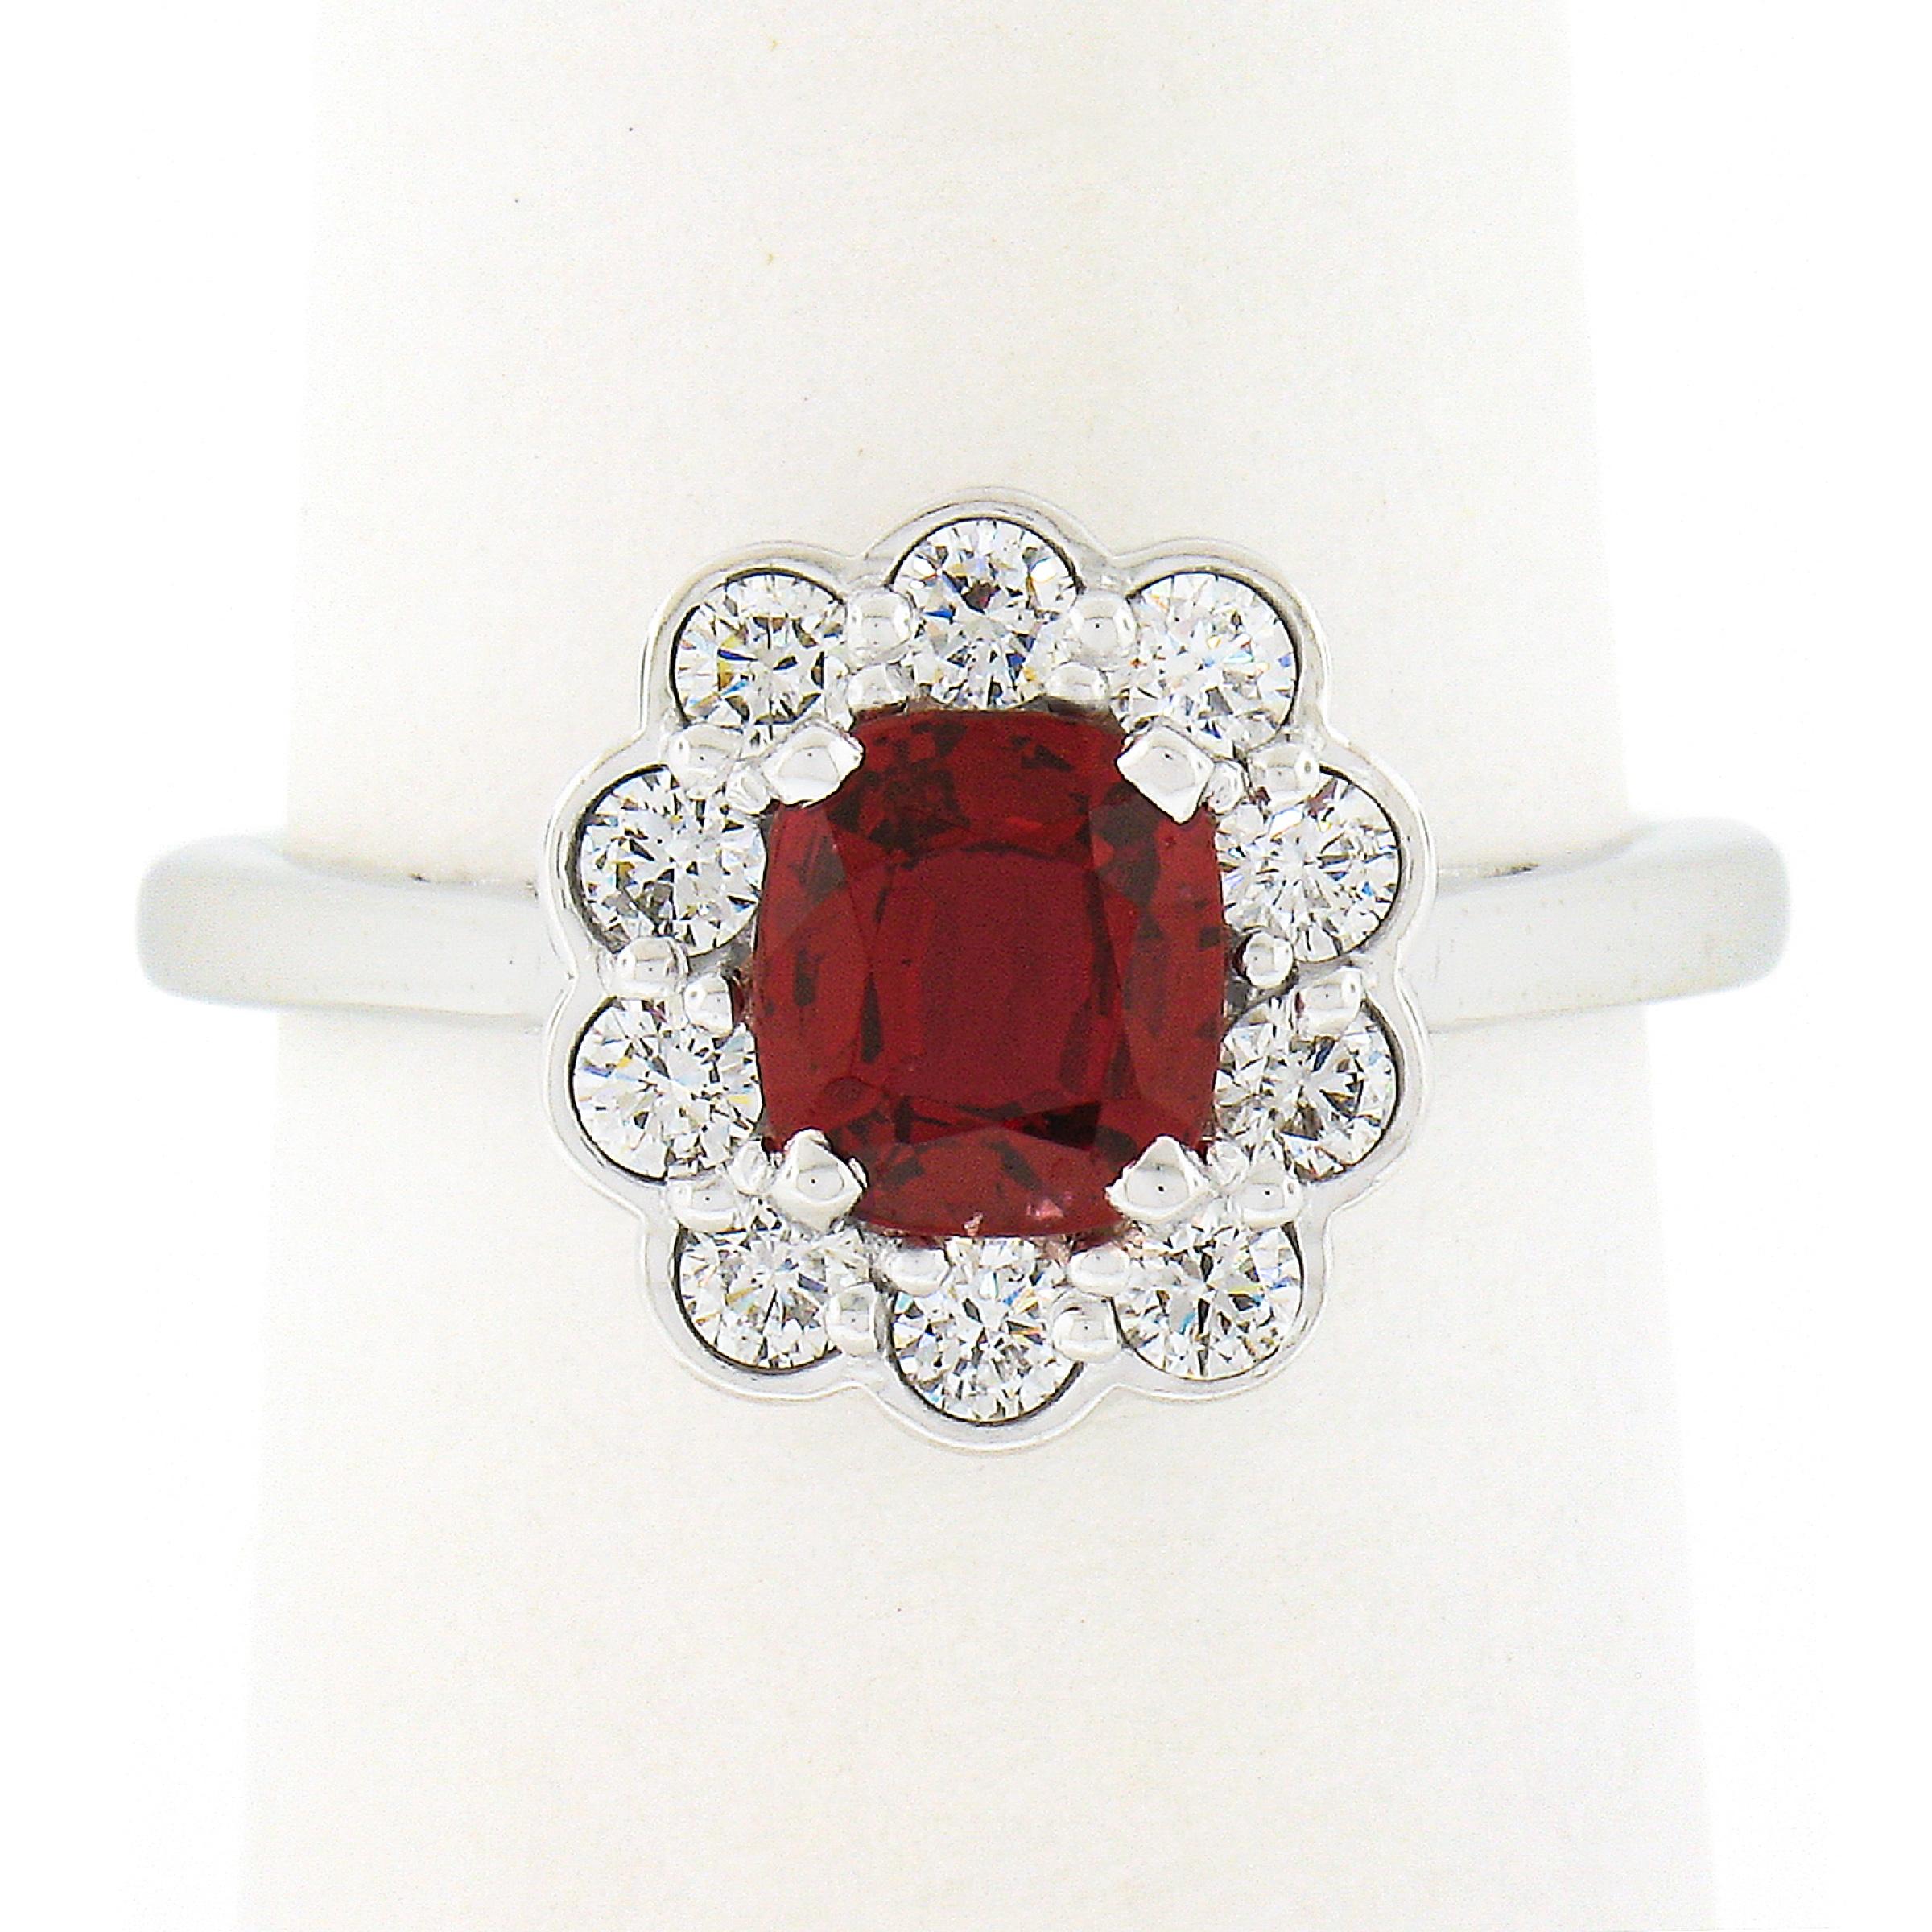 This truly breathtaking custom made ring is newly crafted from solid platinum. It features an elegant flower cluster design set with a, GIA certified, natural spinel stone at its center. This gorgeous gemstone has a cushion brilliant cut and